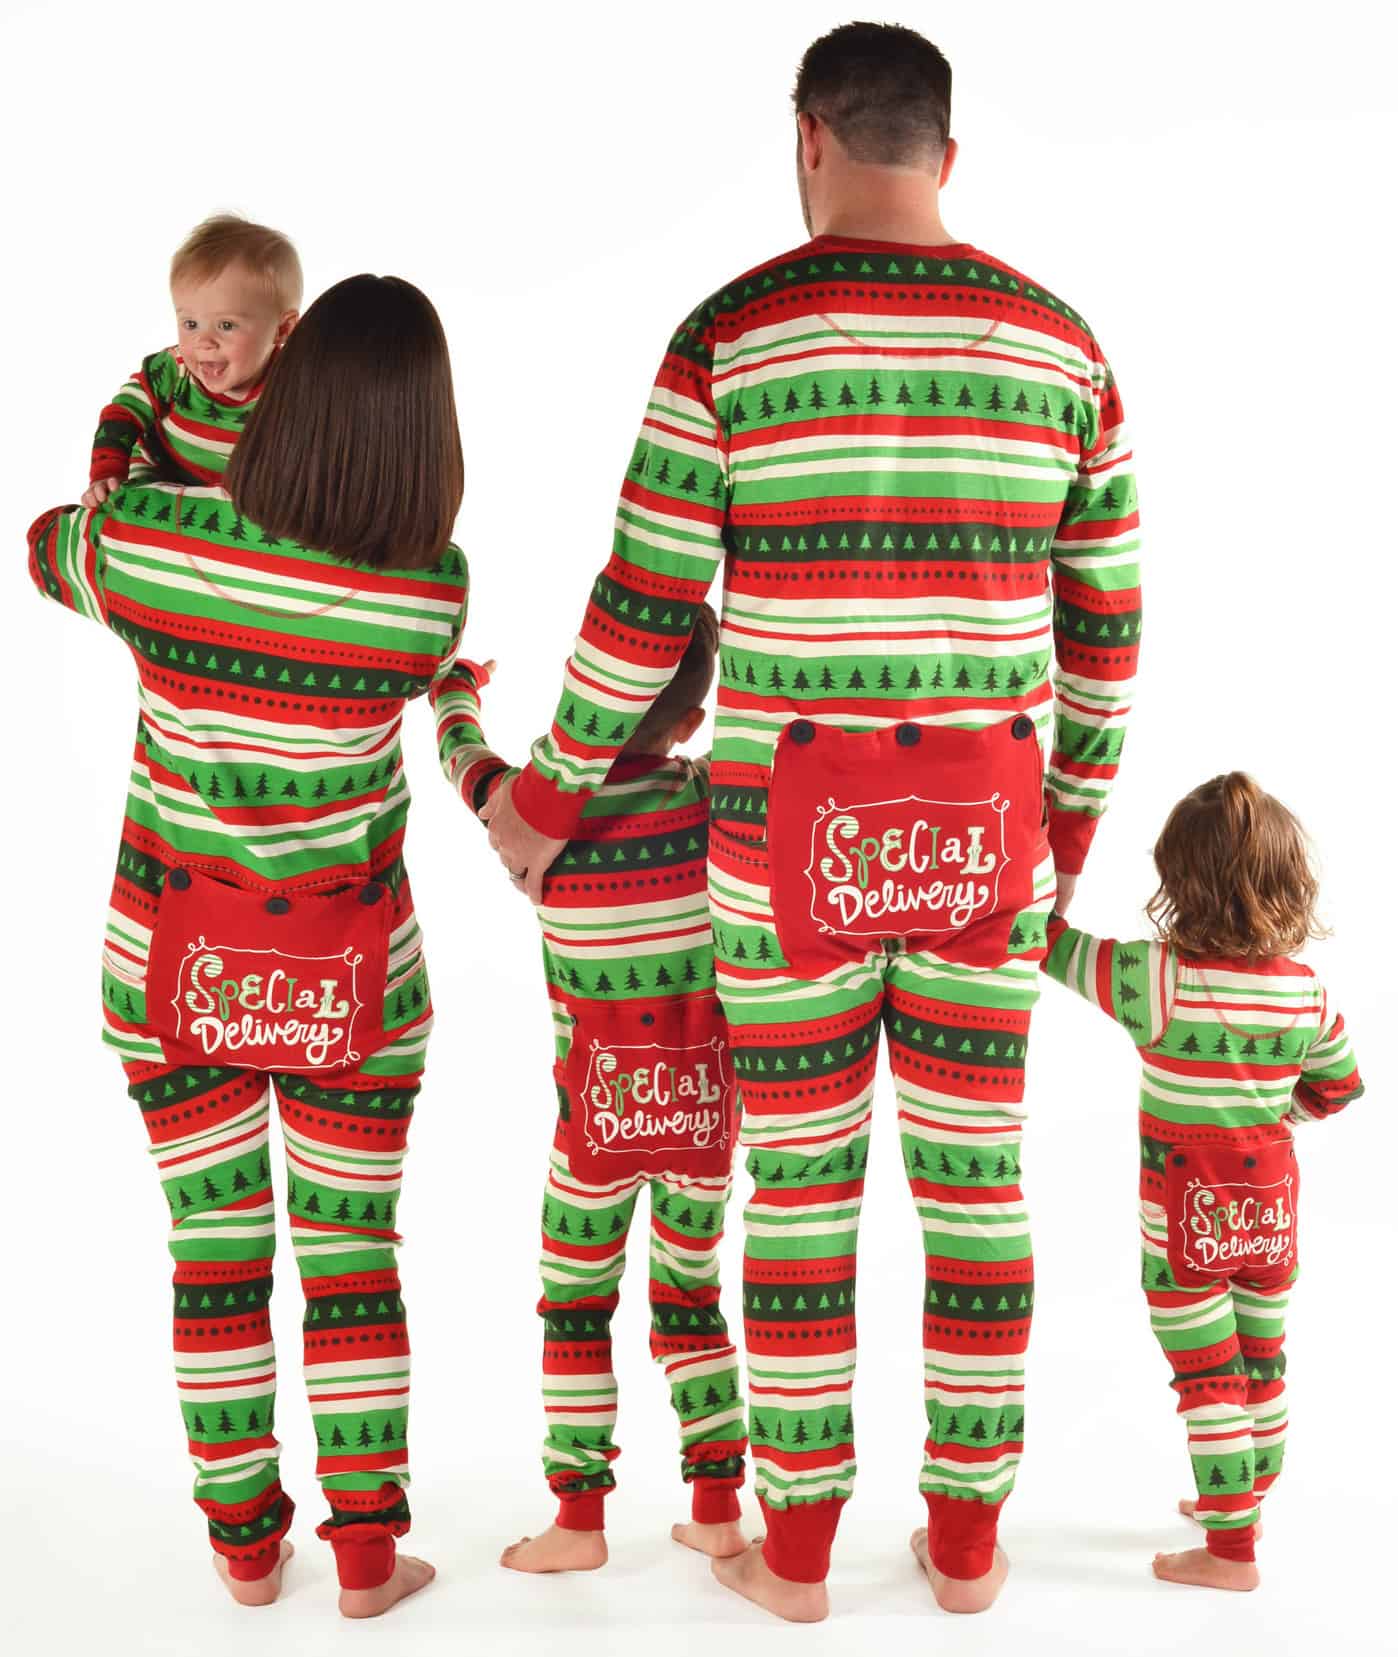 Christmas Family Pajamas for Matching Christmas Morning Pictures